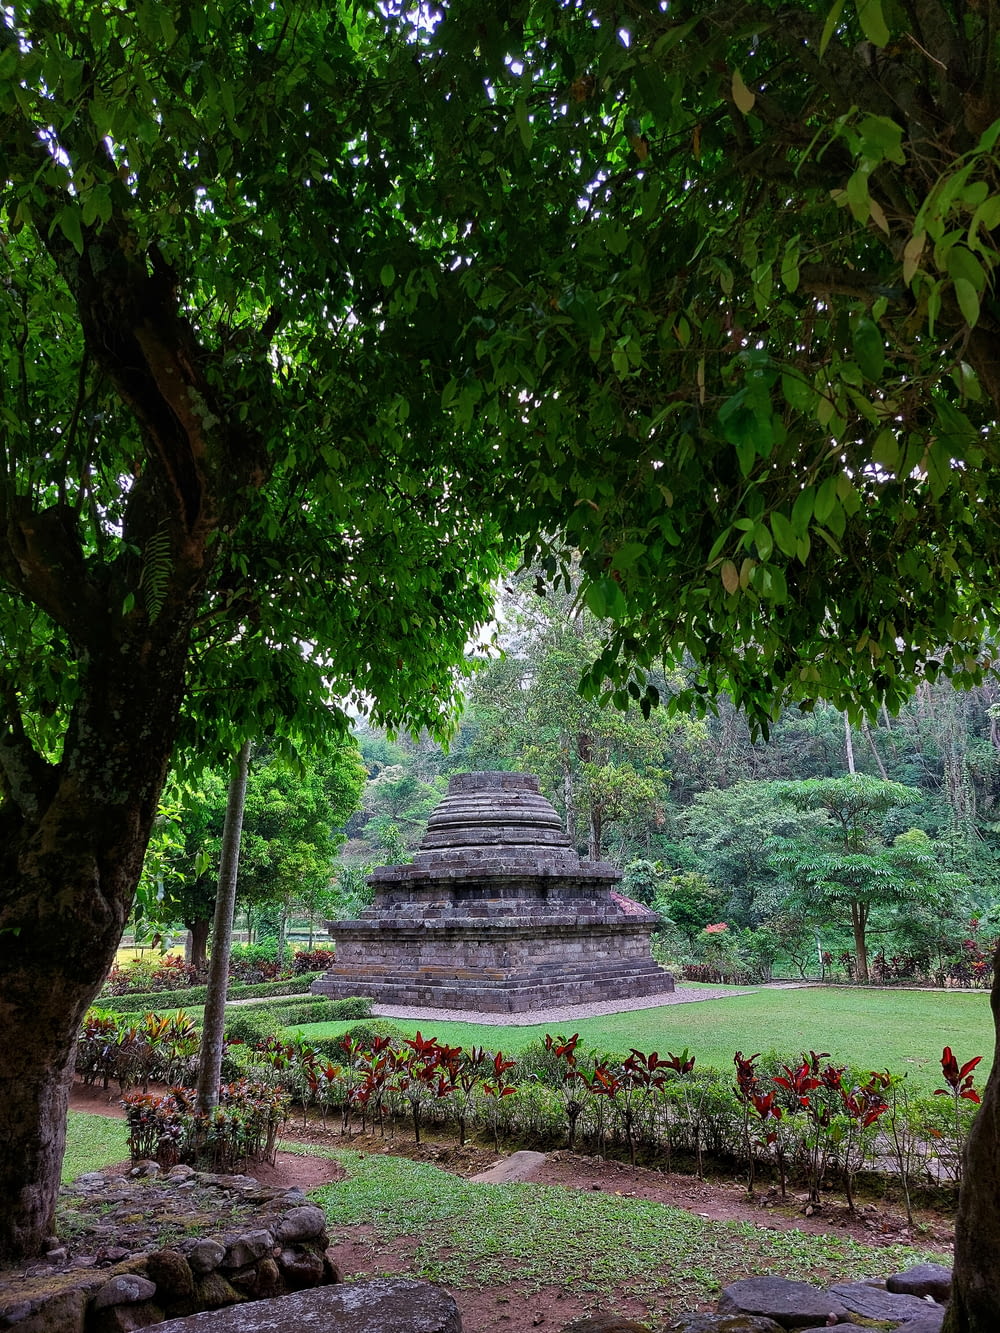 a stone structure in a park